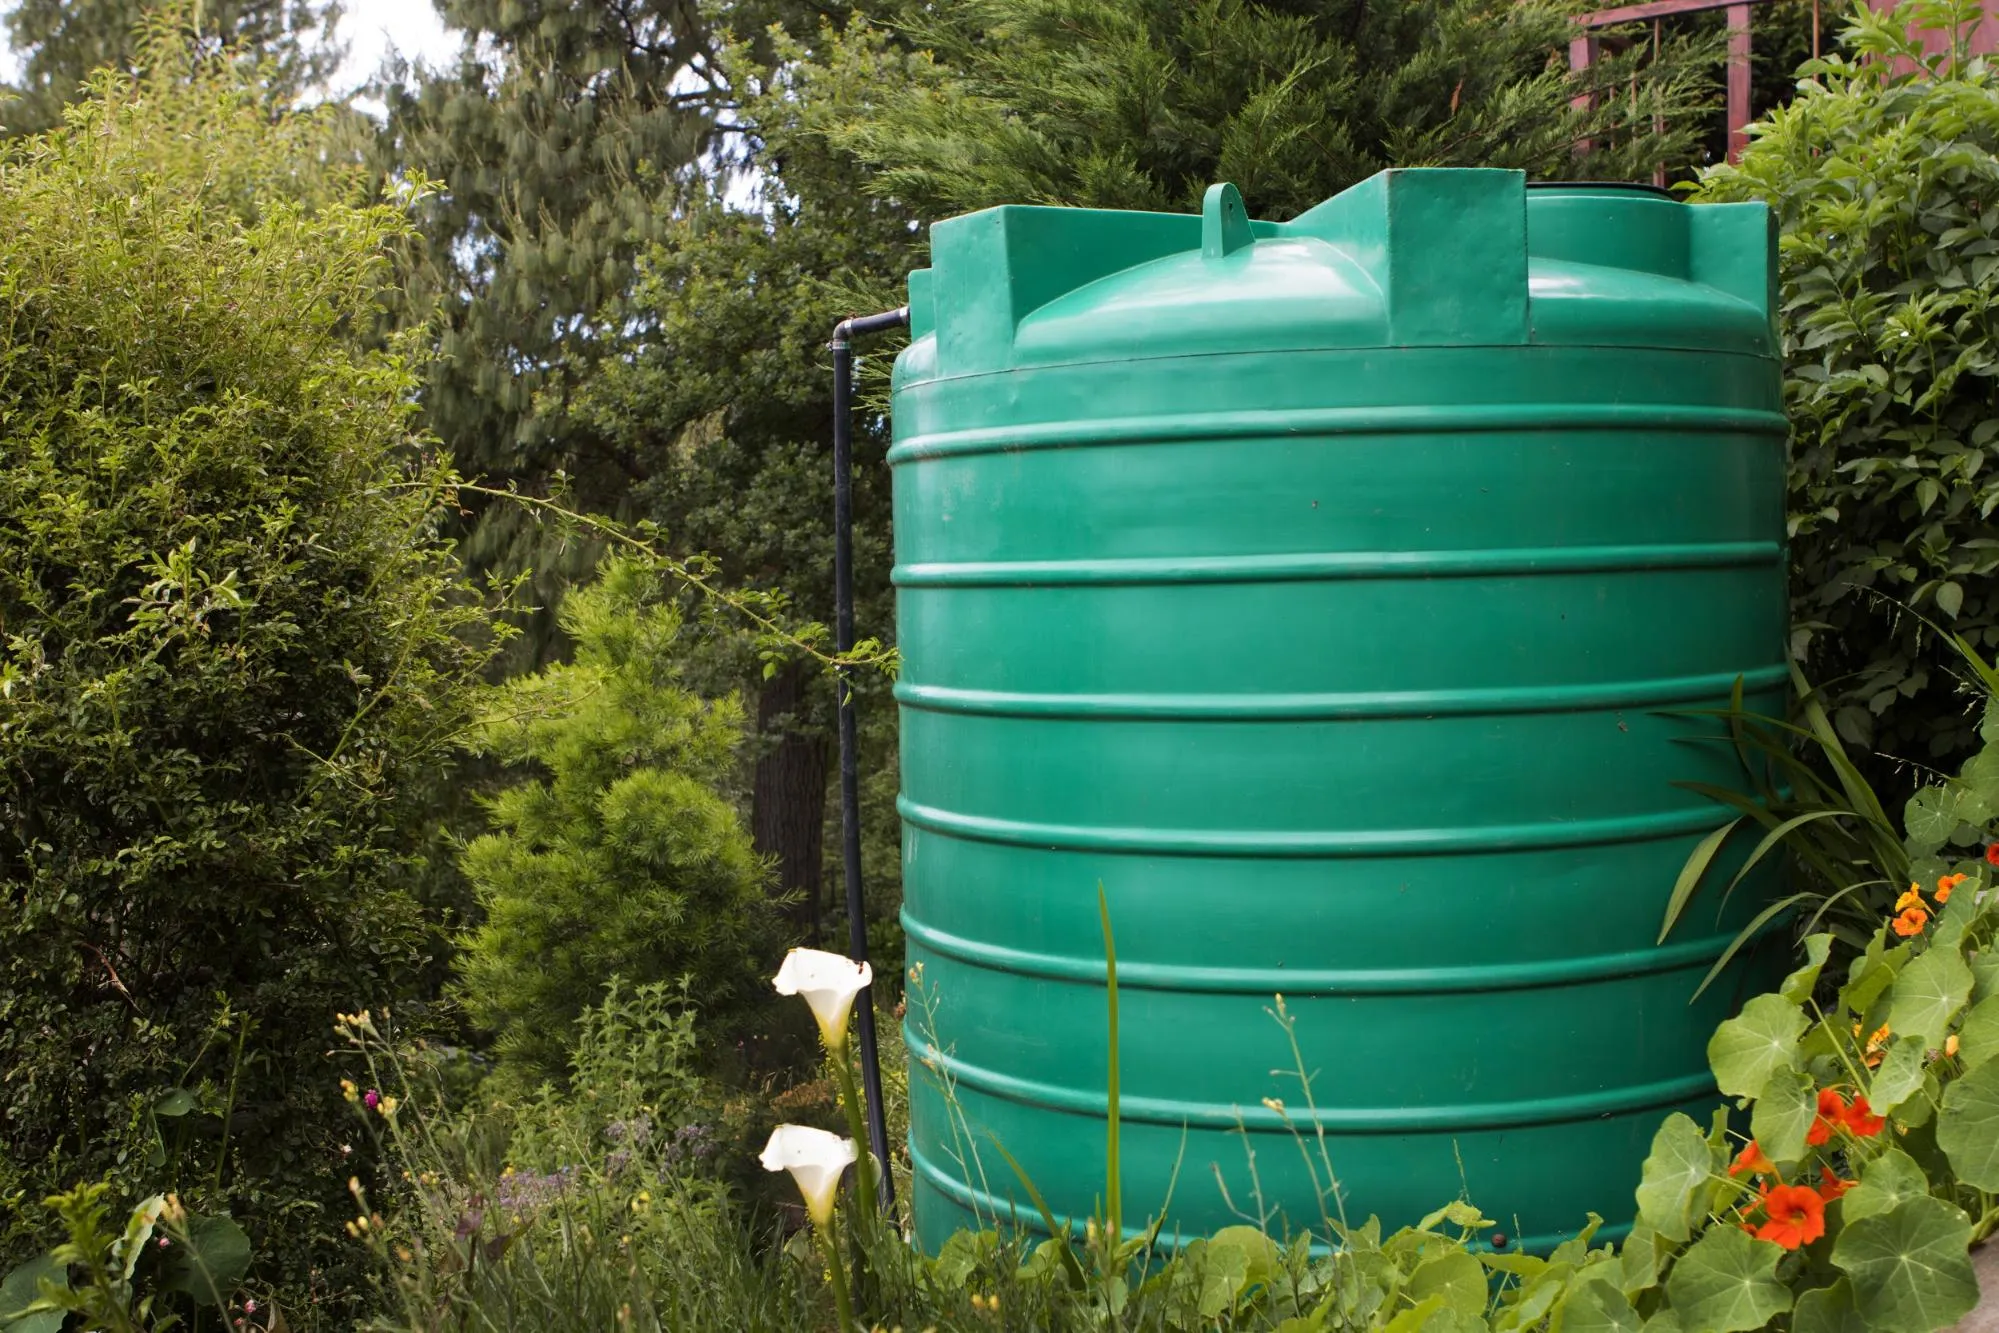 a large green water tank sitting in the middle of a garden.